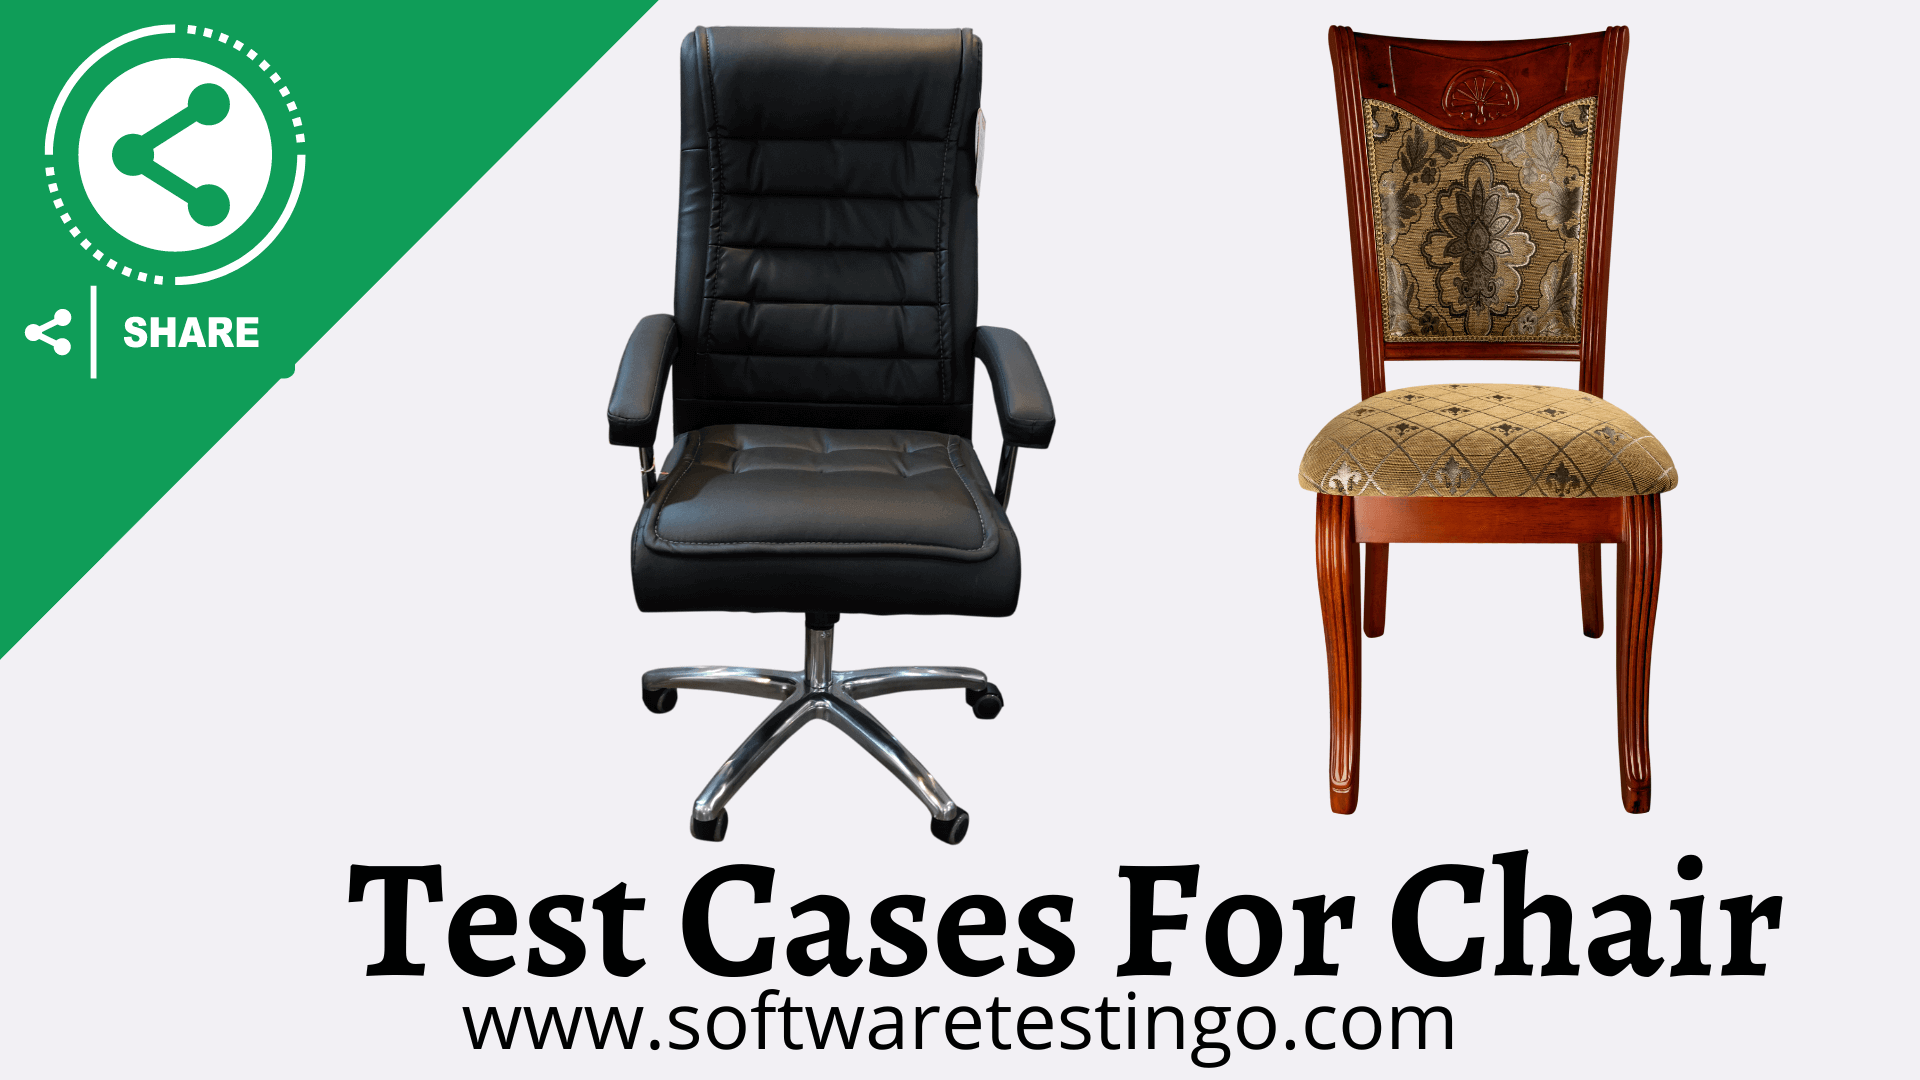 Test Cases For Chair